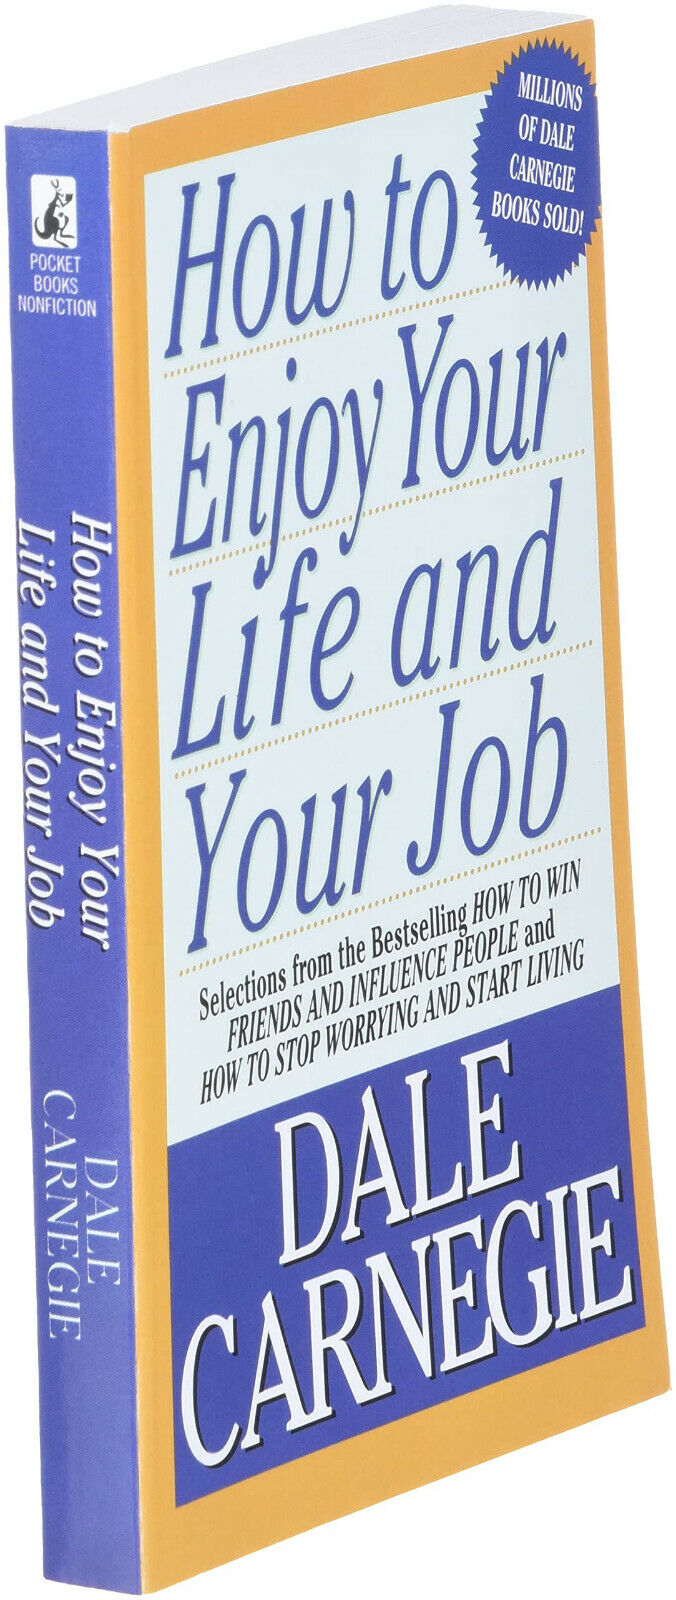 How To Enjoy Your Life And Your Job Mass Market Paperback